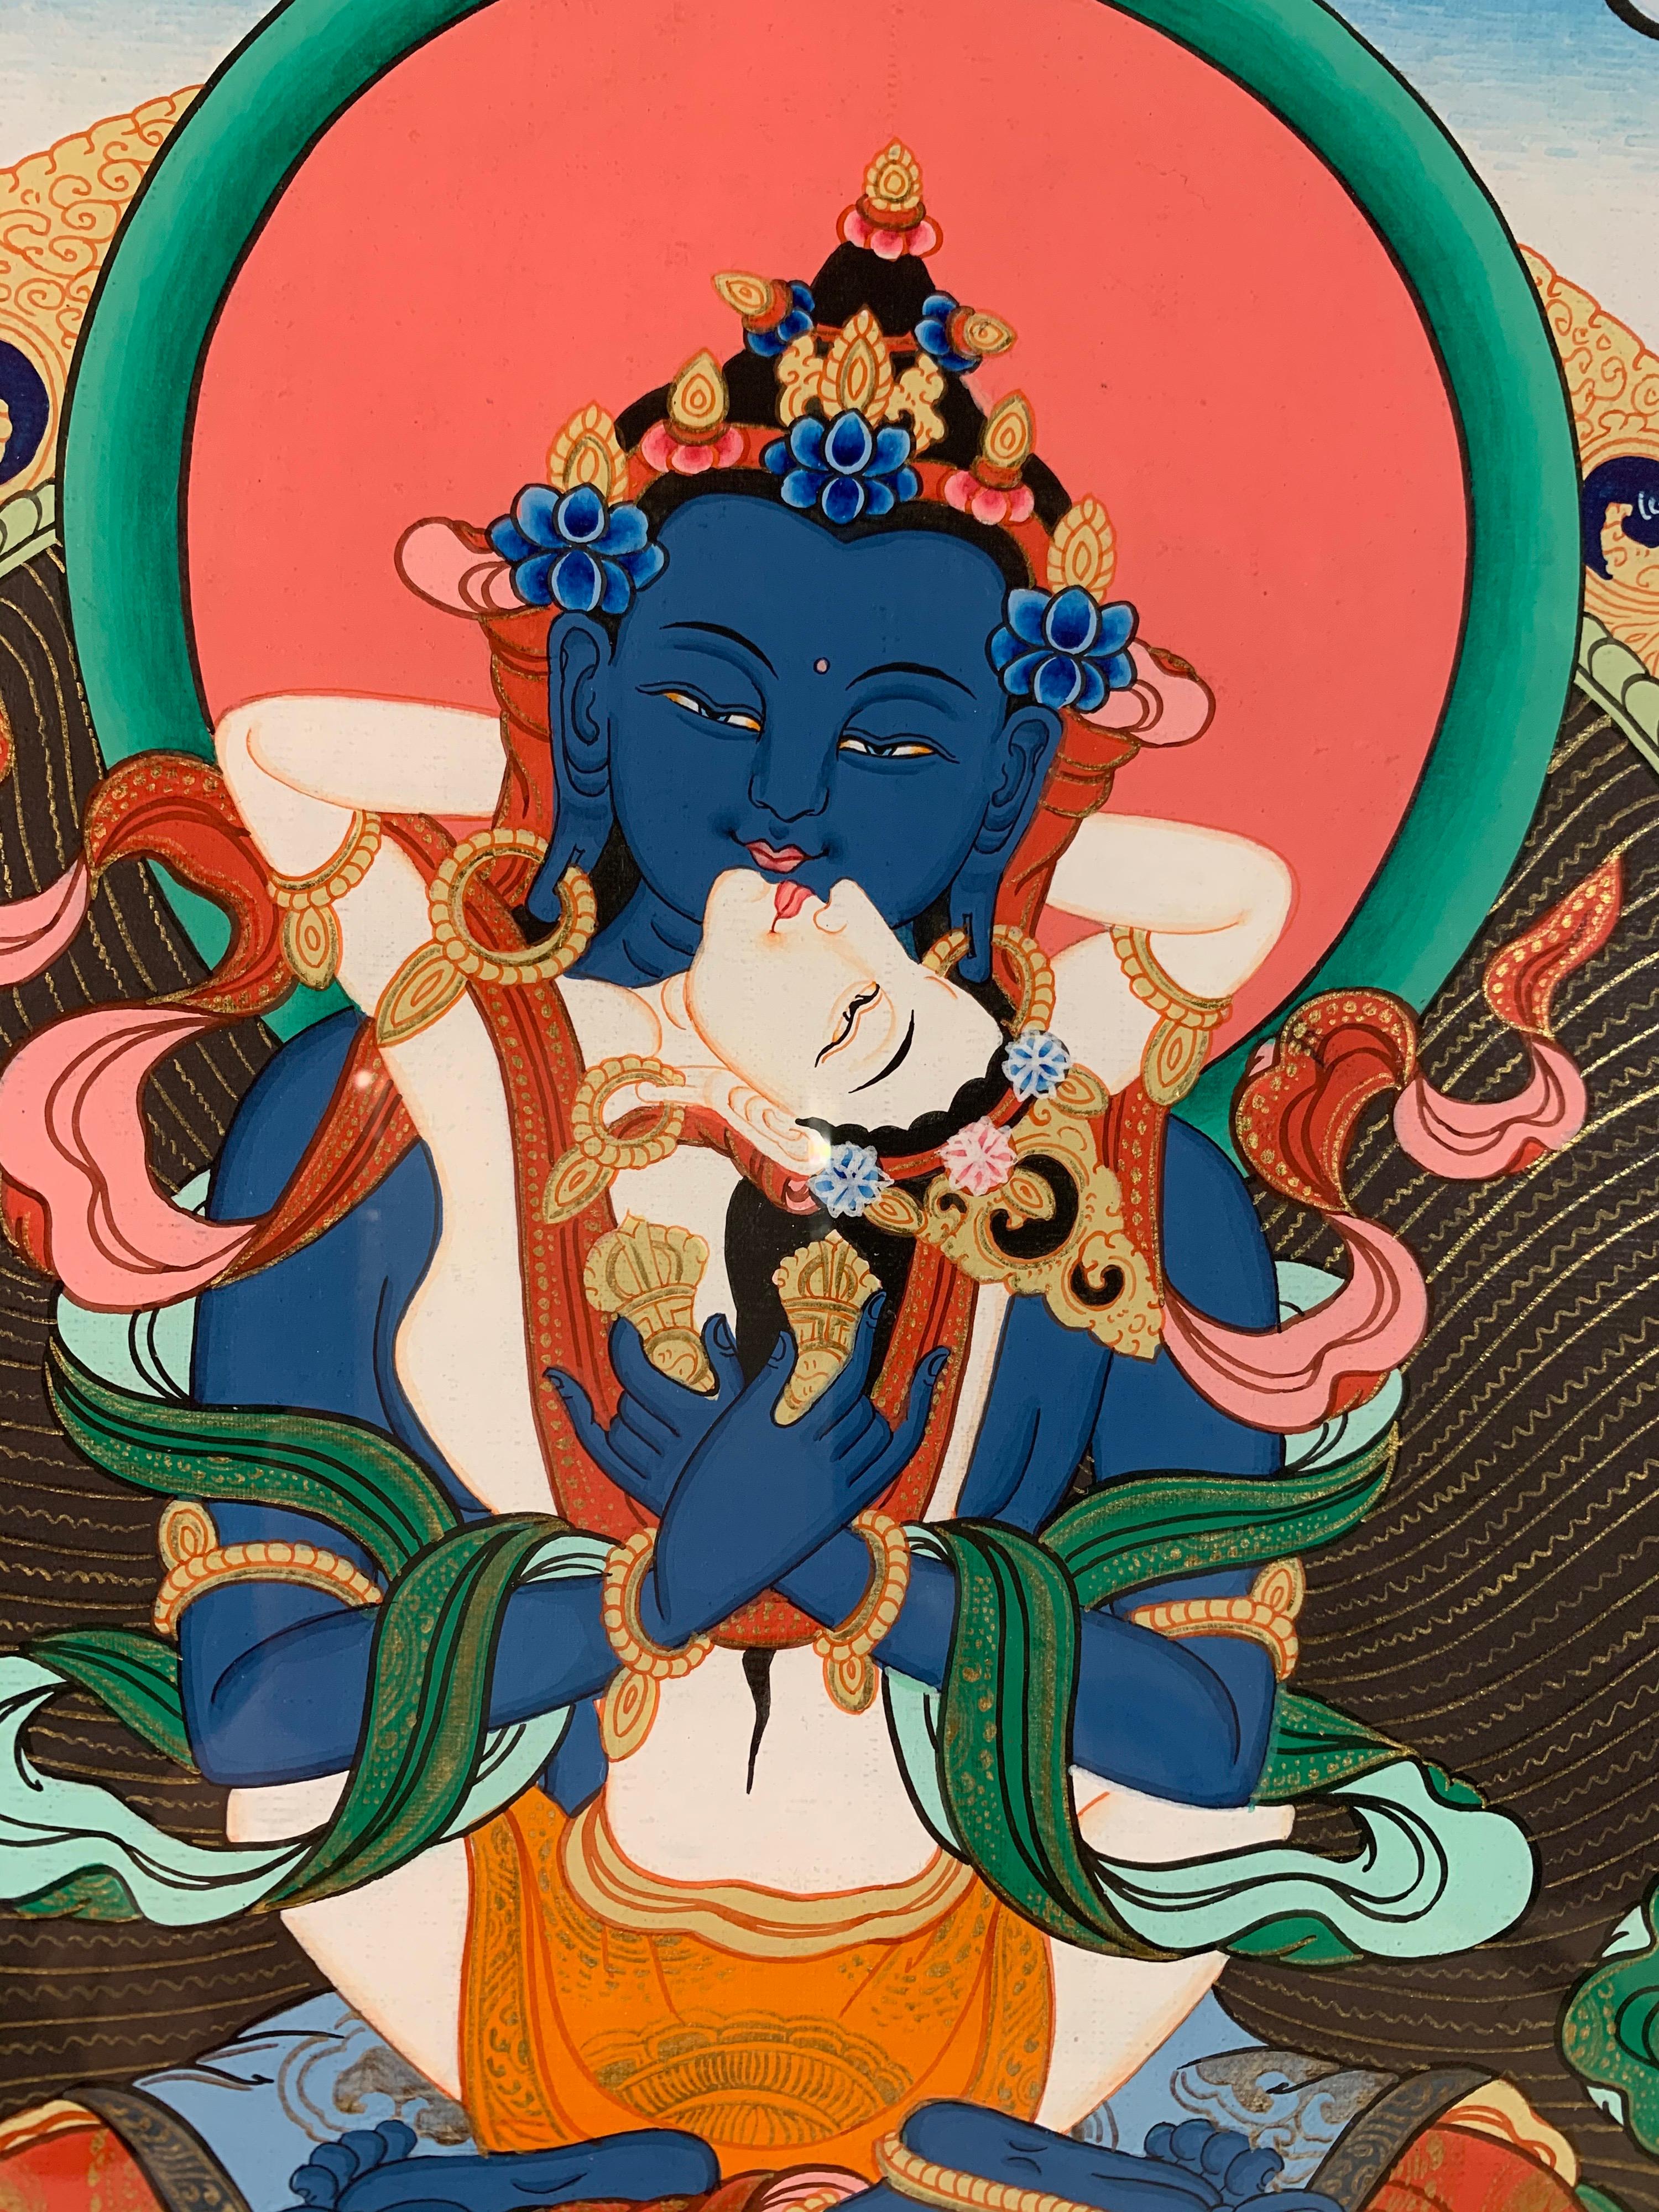 This framed figurative thangka of Buddha-Shakti is hand painted on canvas with 24k real gold.
This thangka depicts Buddha and Shakti in intimate embrace or 